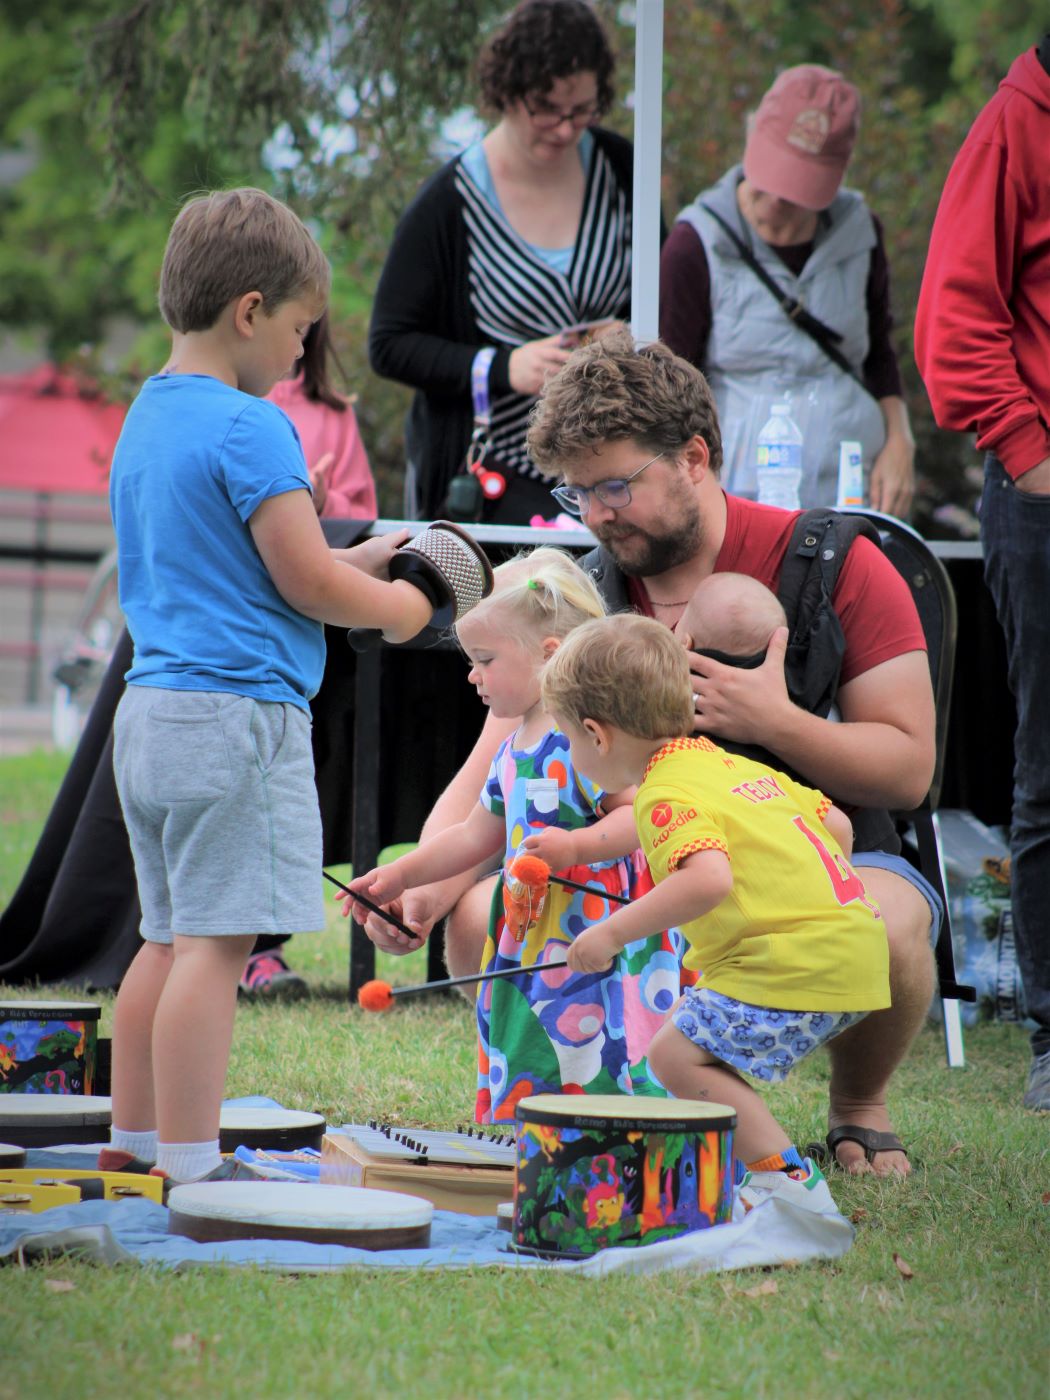 Father and several young children playing instruments outside at a music festival